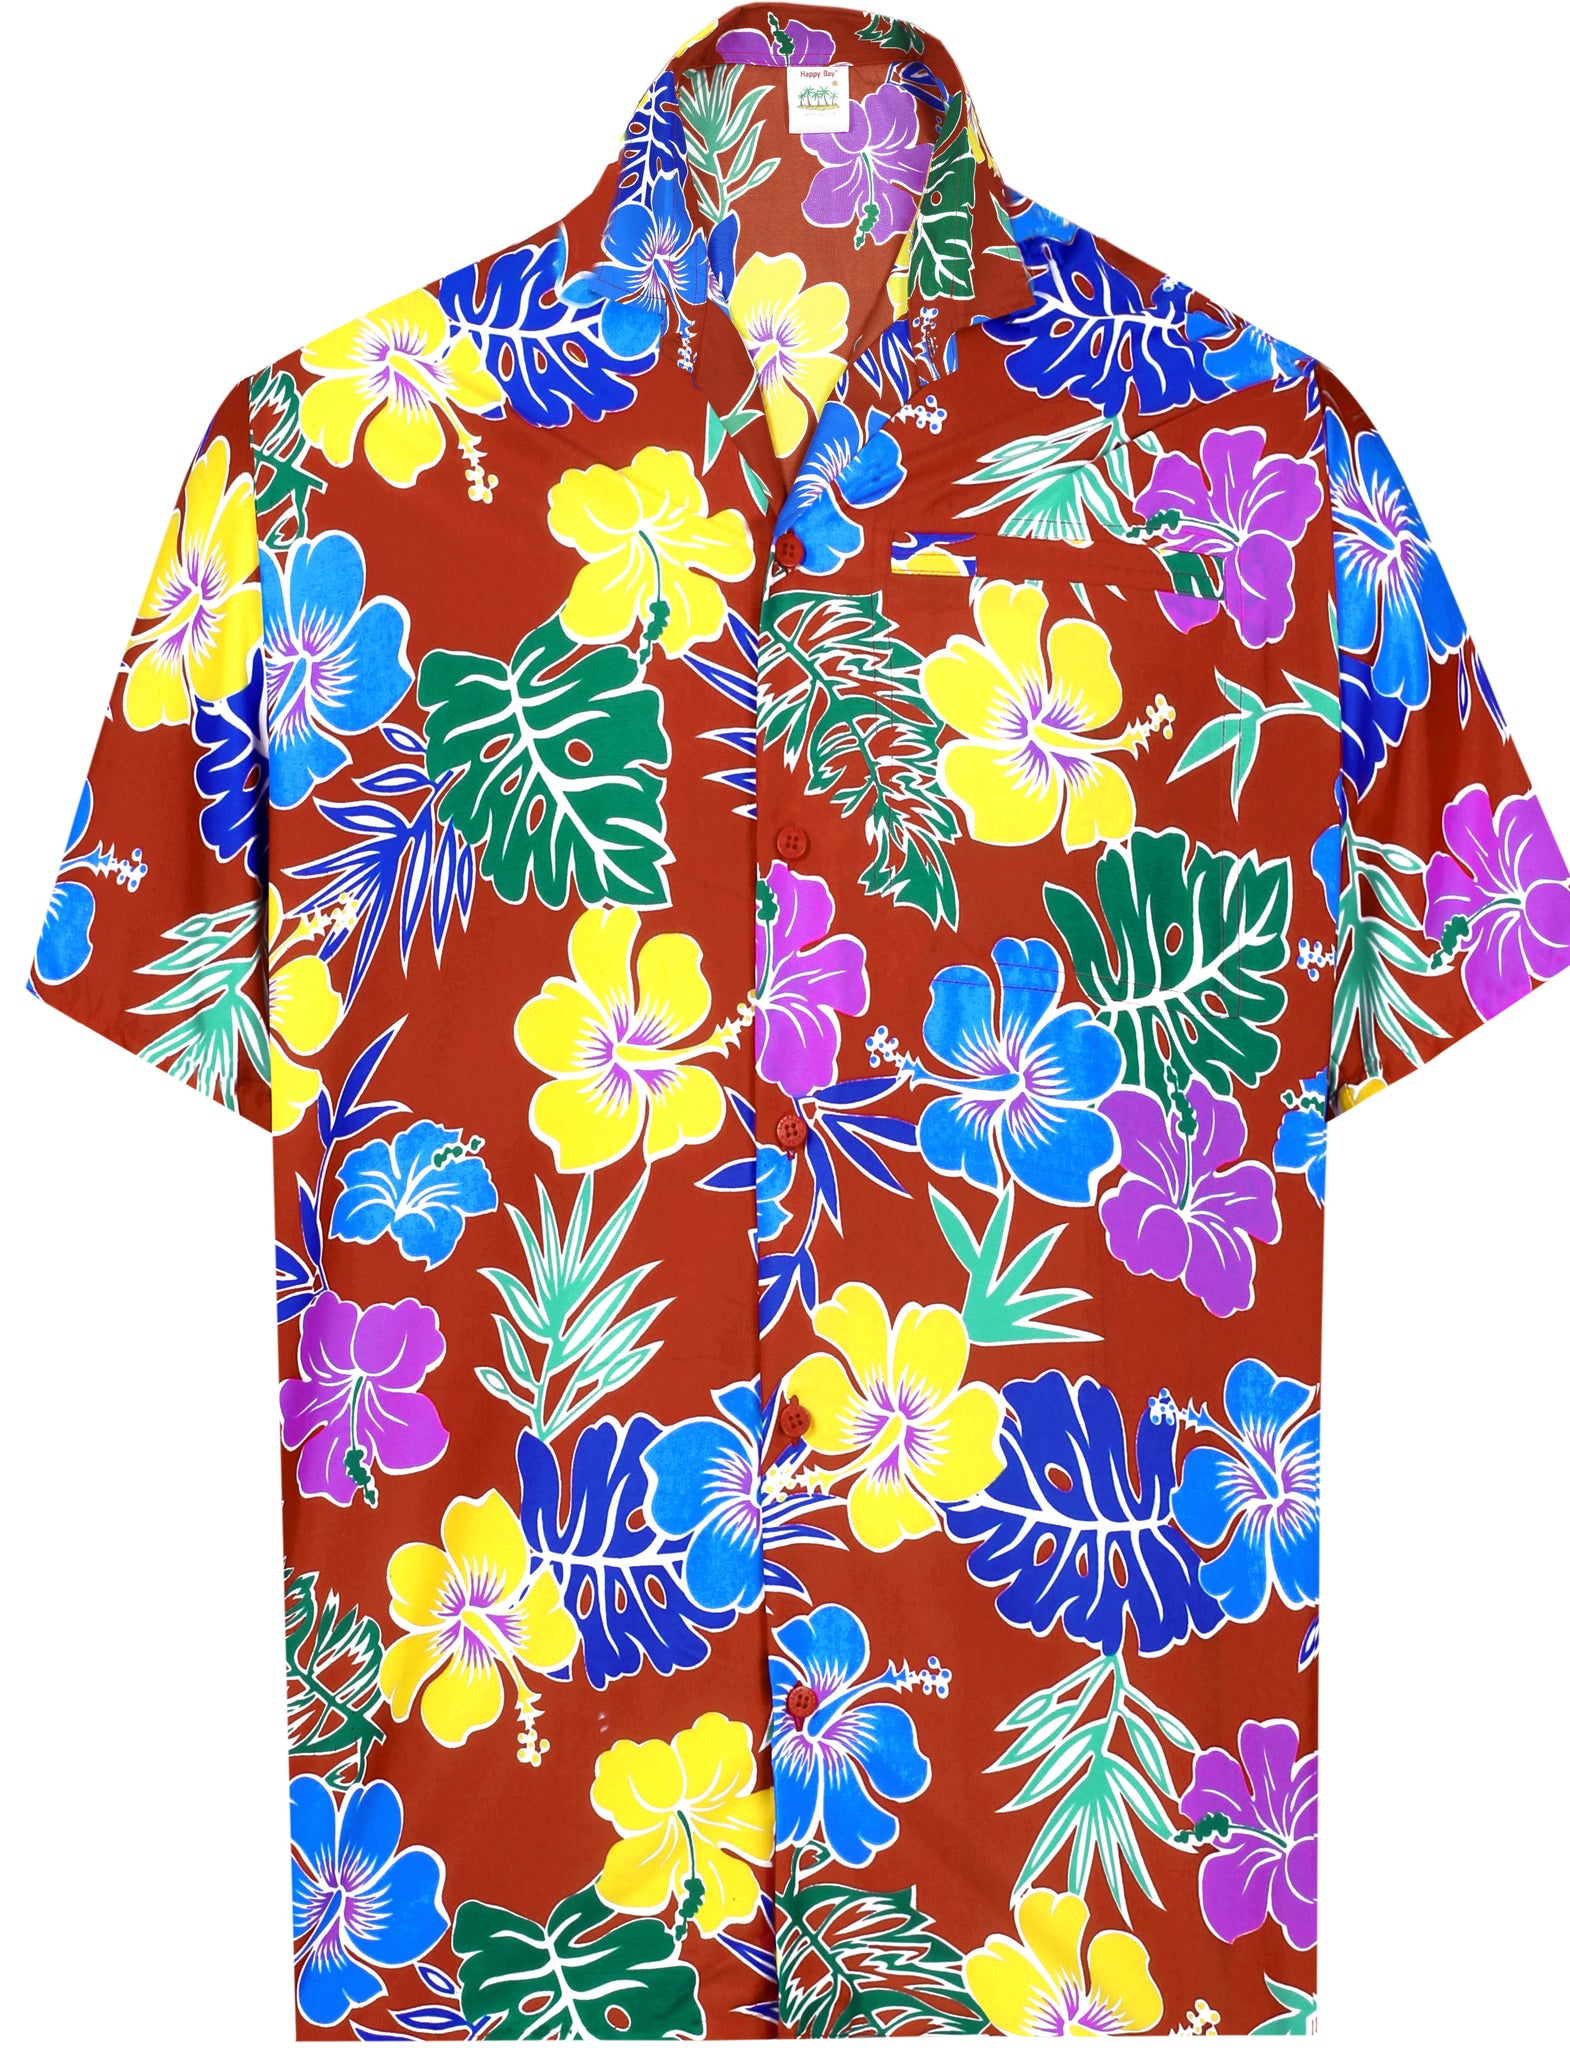 HAPPY BAY Women's Blouse Tops Hawaiian Tie Up Shirts S White, All hibiscus